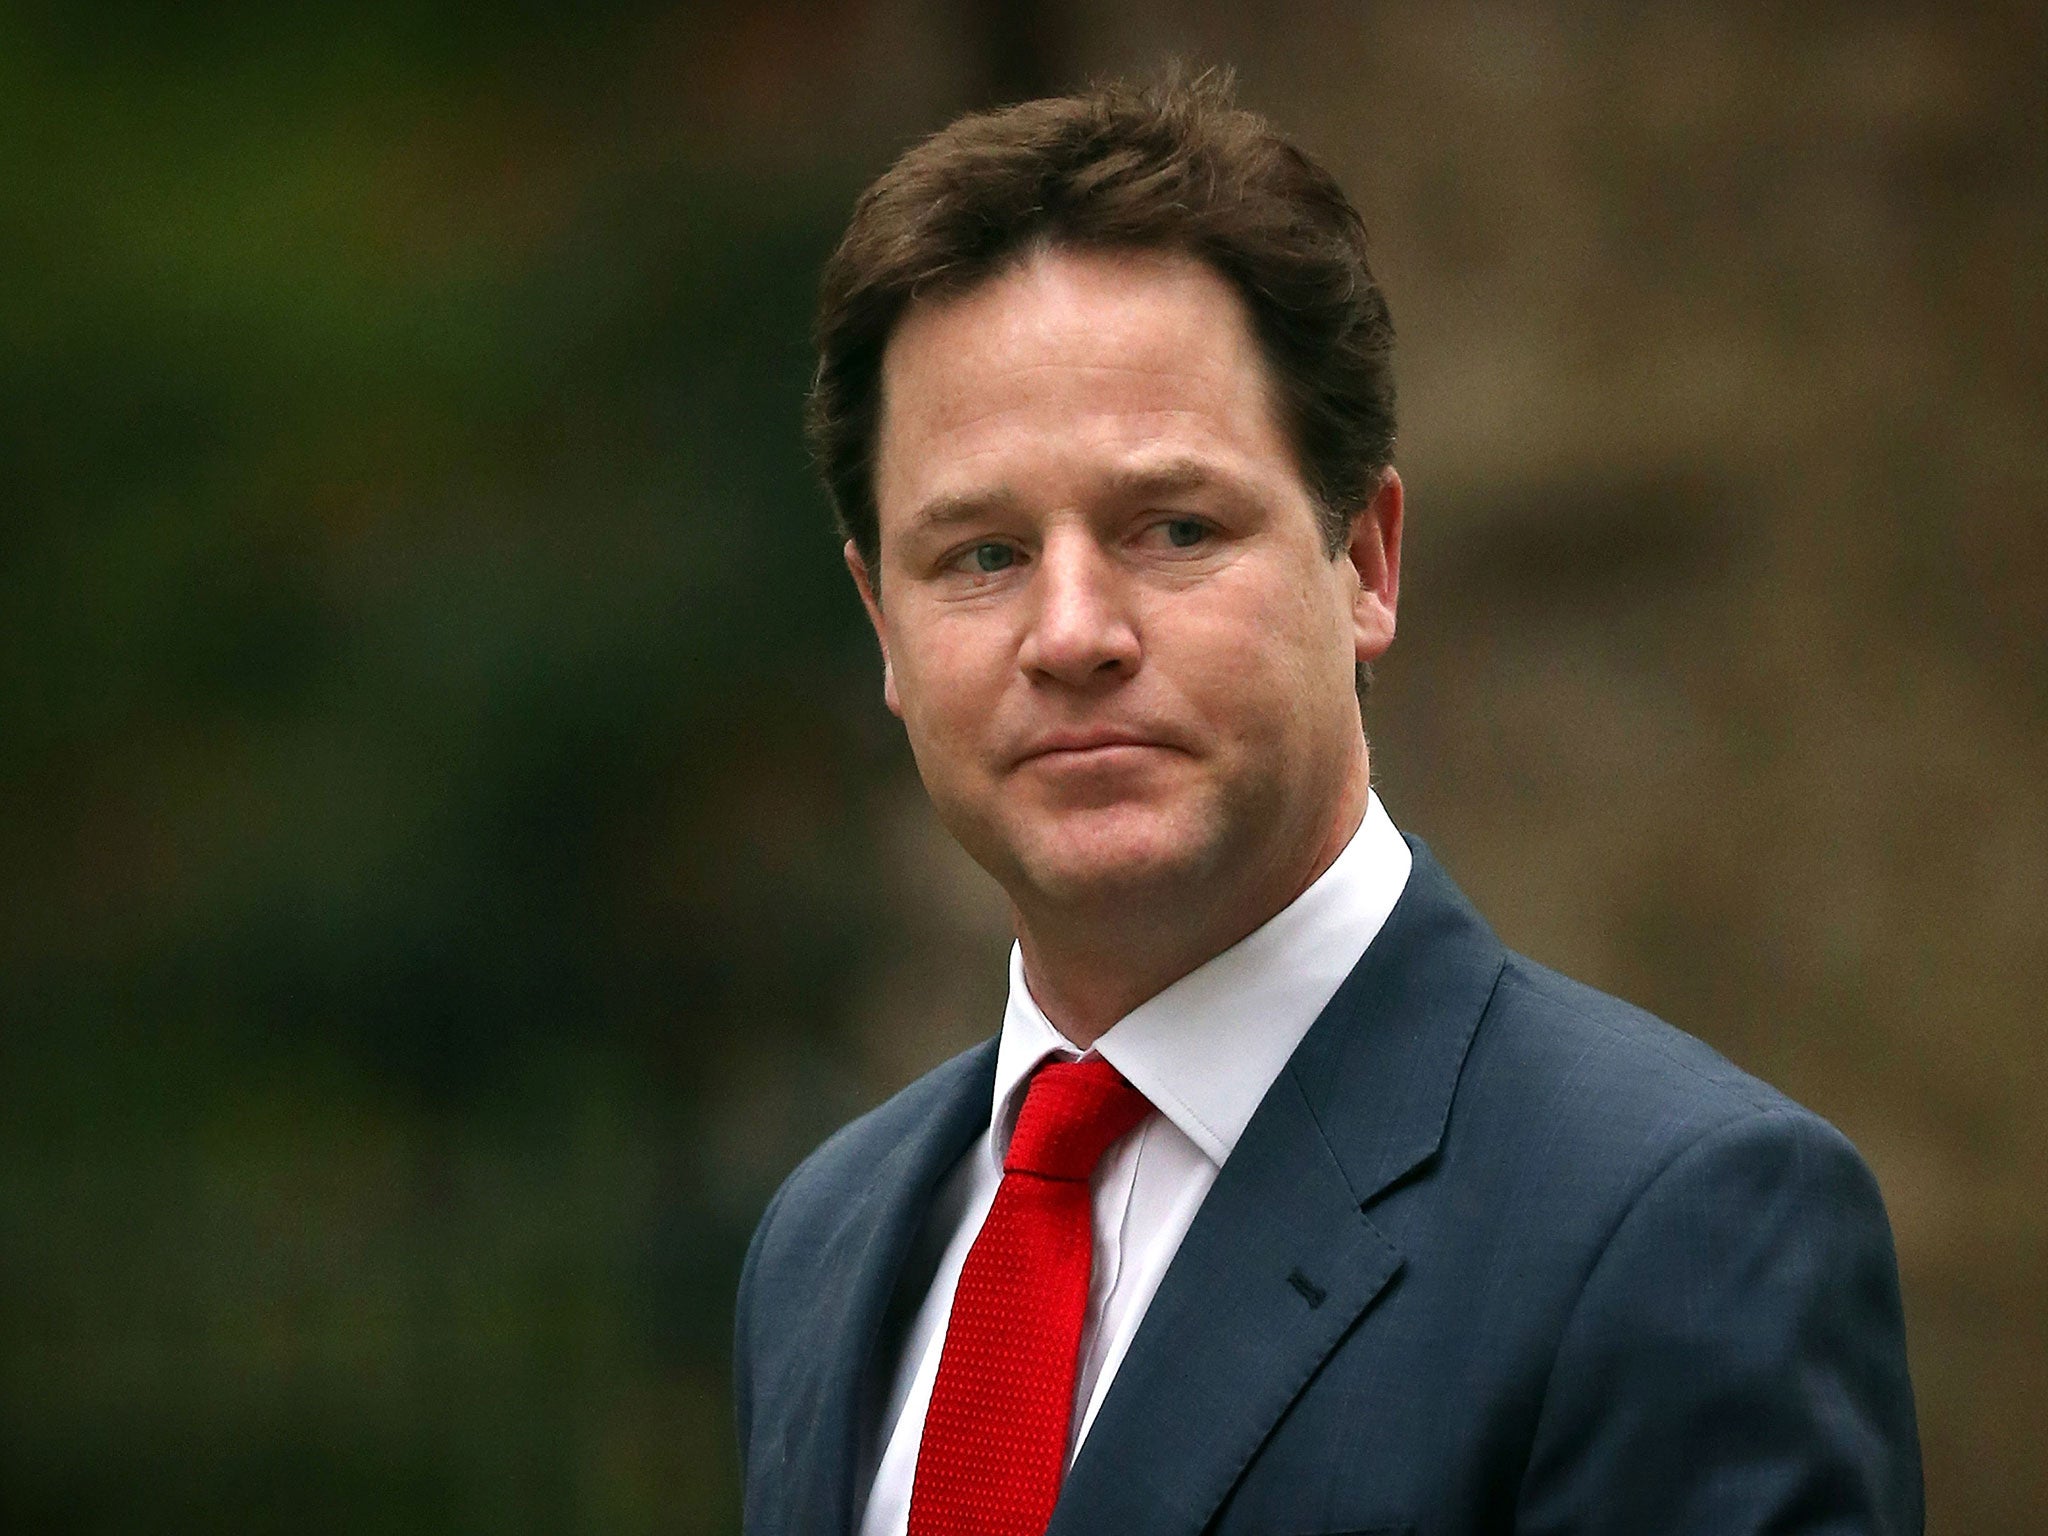 Clegg said the Government is 'actively looking' at forms of compensation to homeowners near to where the new green cities could be built